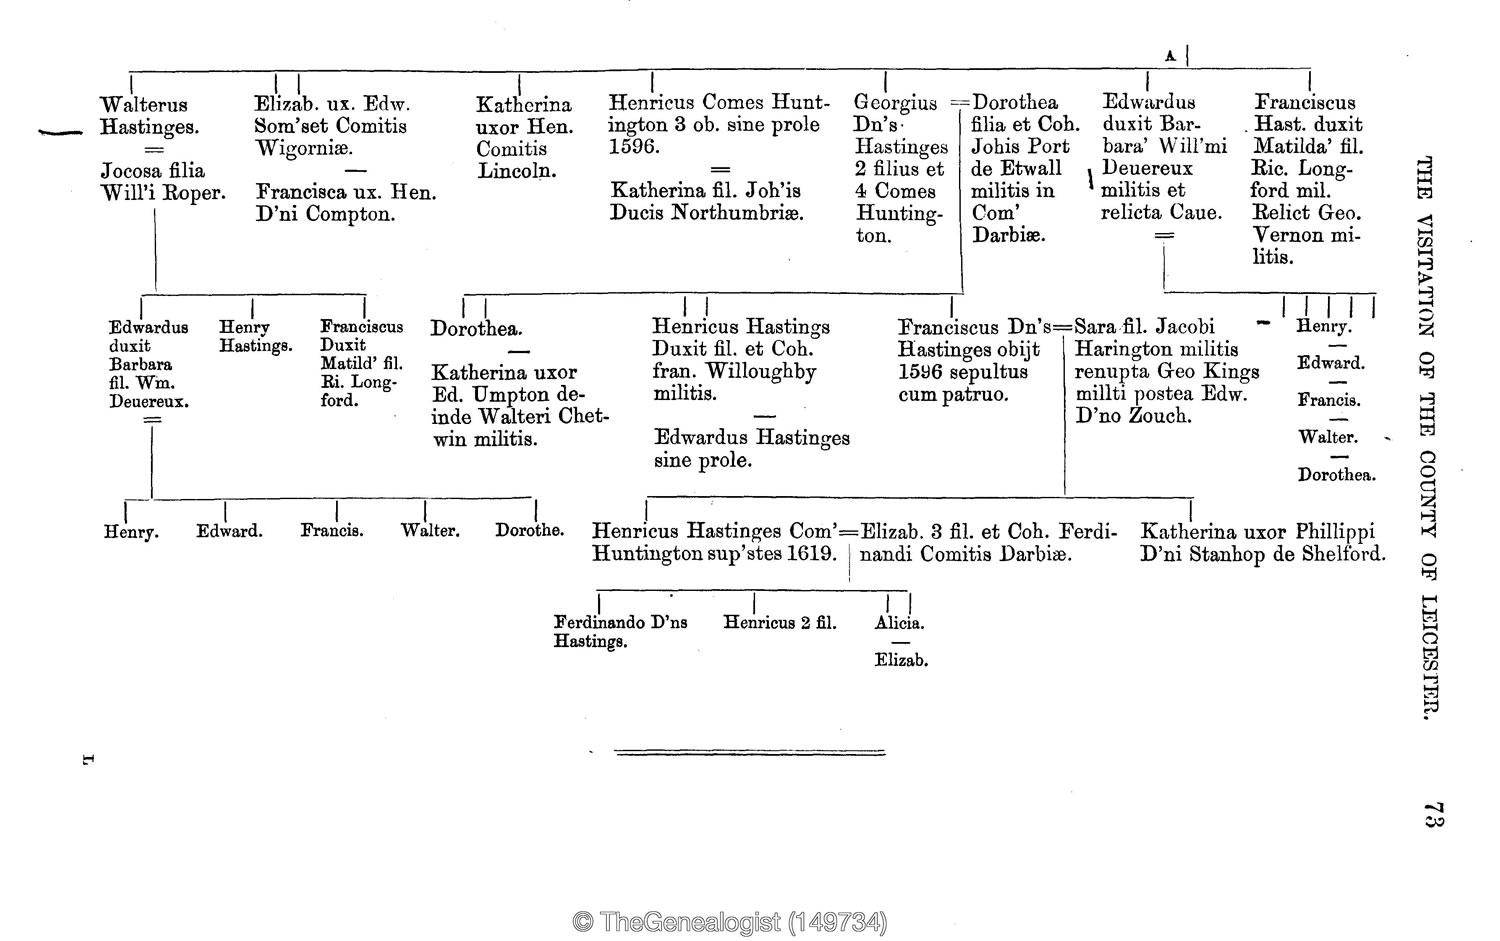 Pedigree of the Hastings family from the 1619 Leicestershire Visitations on TheGenealogist